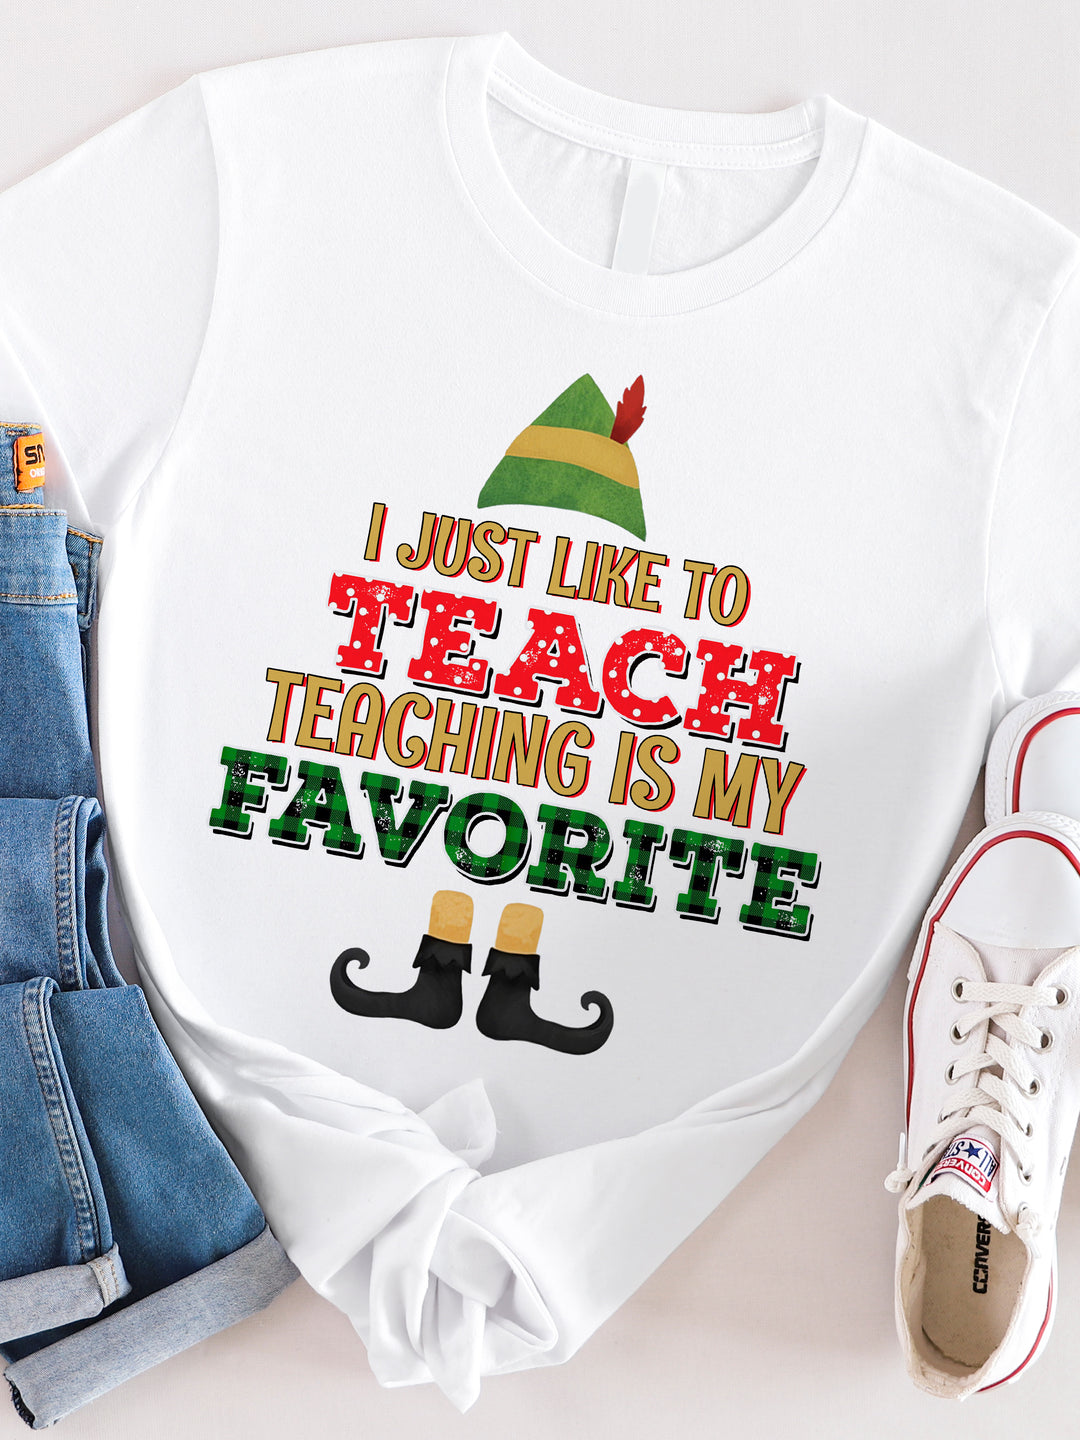 I Just like to Teach Teaching is my Favorite Graphic Tee